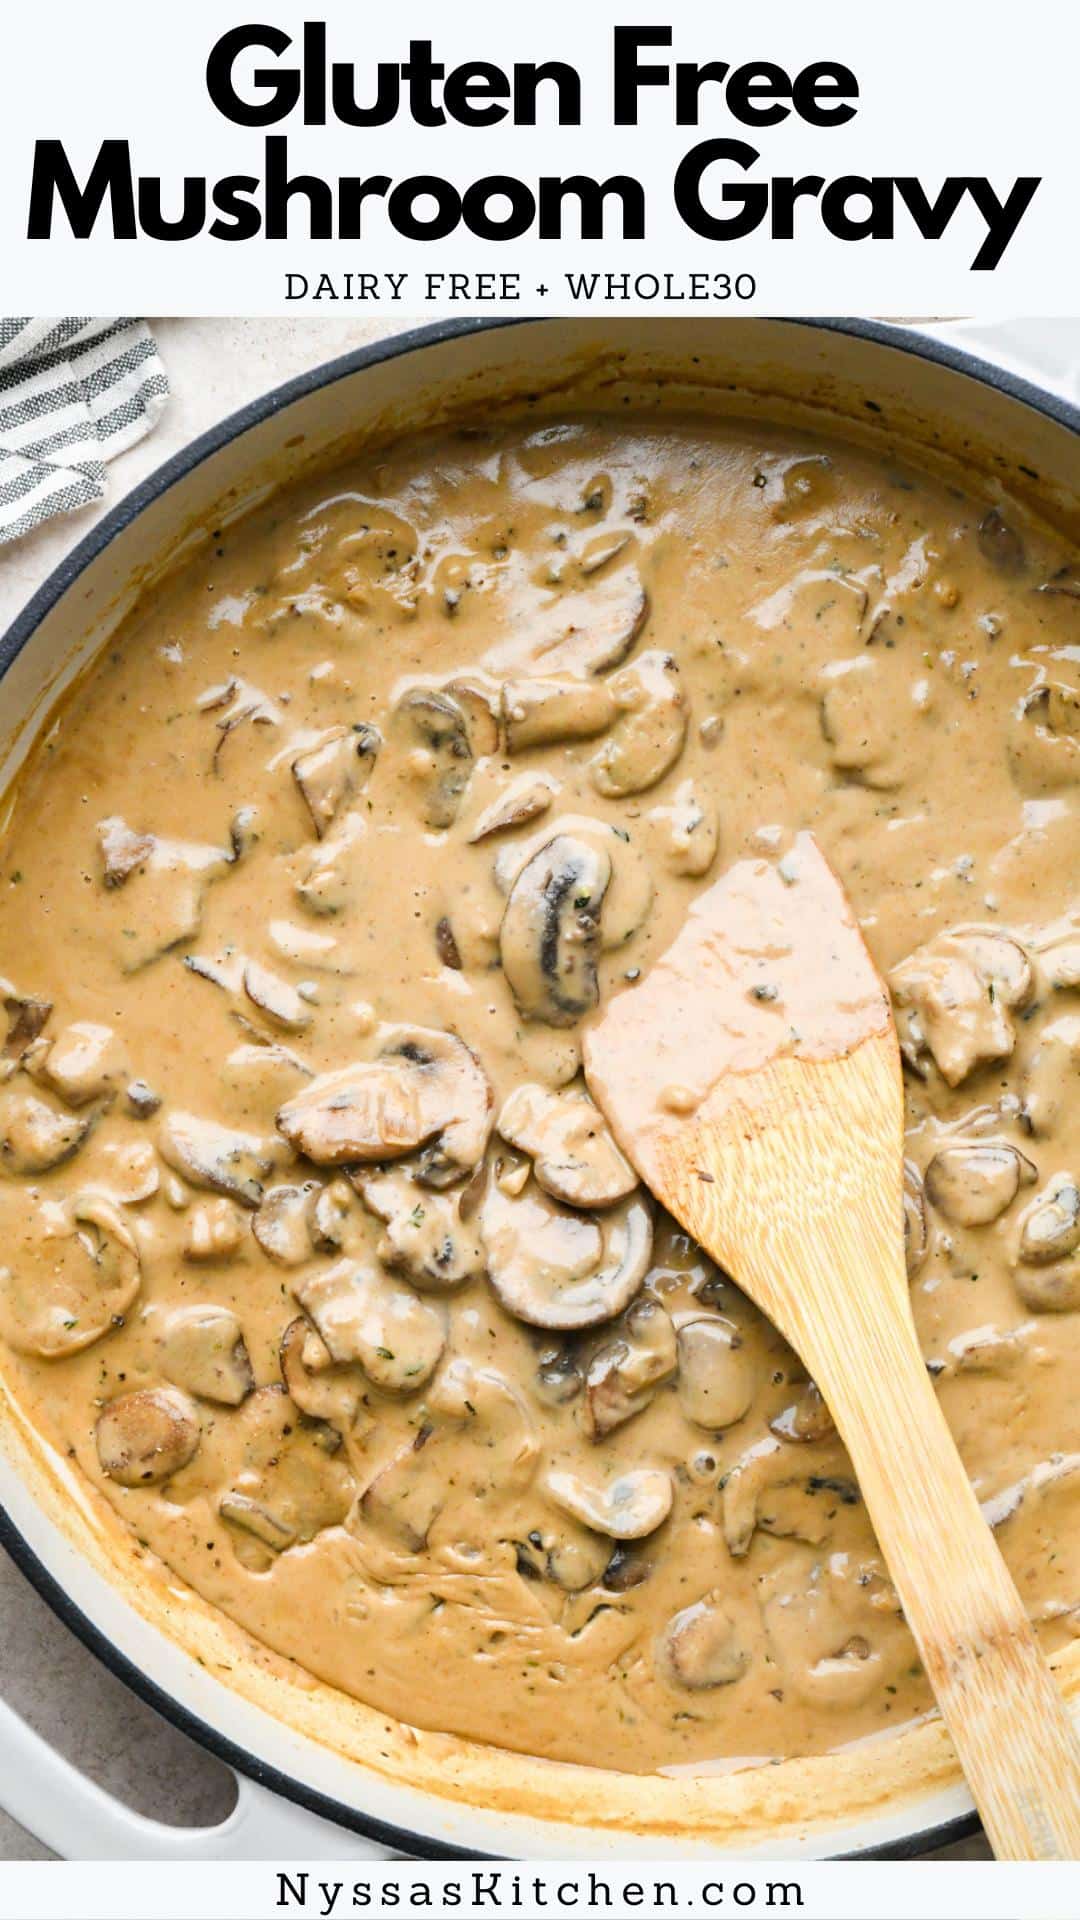 This gluten free mushroom gravy is the stuff that dreams are made of! It is creamy, rich, deeply flavorful, and made without gluten or dairy. It's also make-ahead friendly and an easy recipe perfect for weeknight meals or holidays. It pairs beautifully with everything from mashed potatoes to pan-seared protein to biscuits and gravy. Versatile and a total crowd-pleaser!